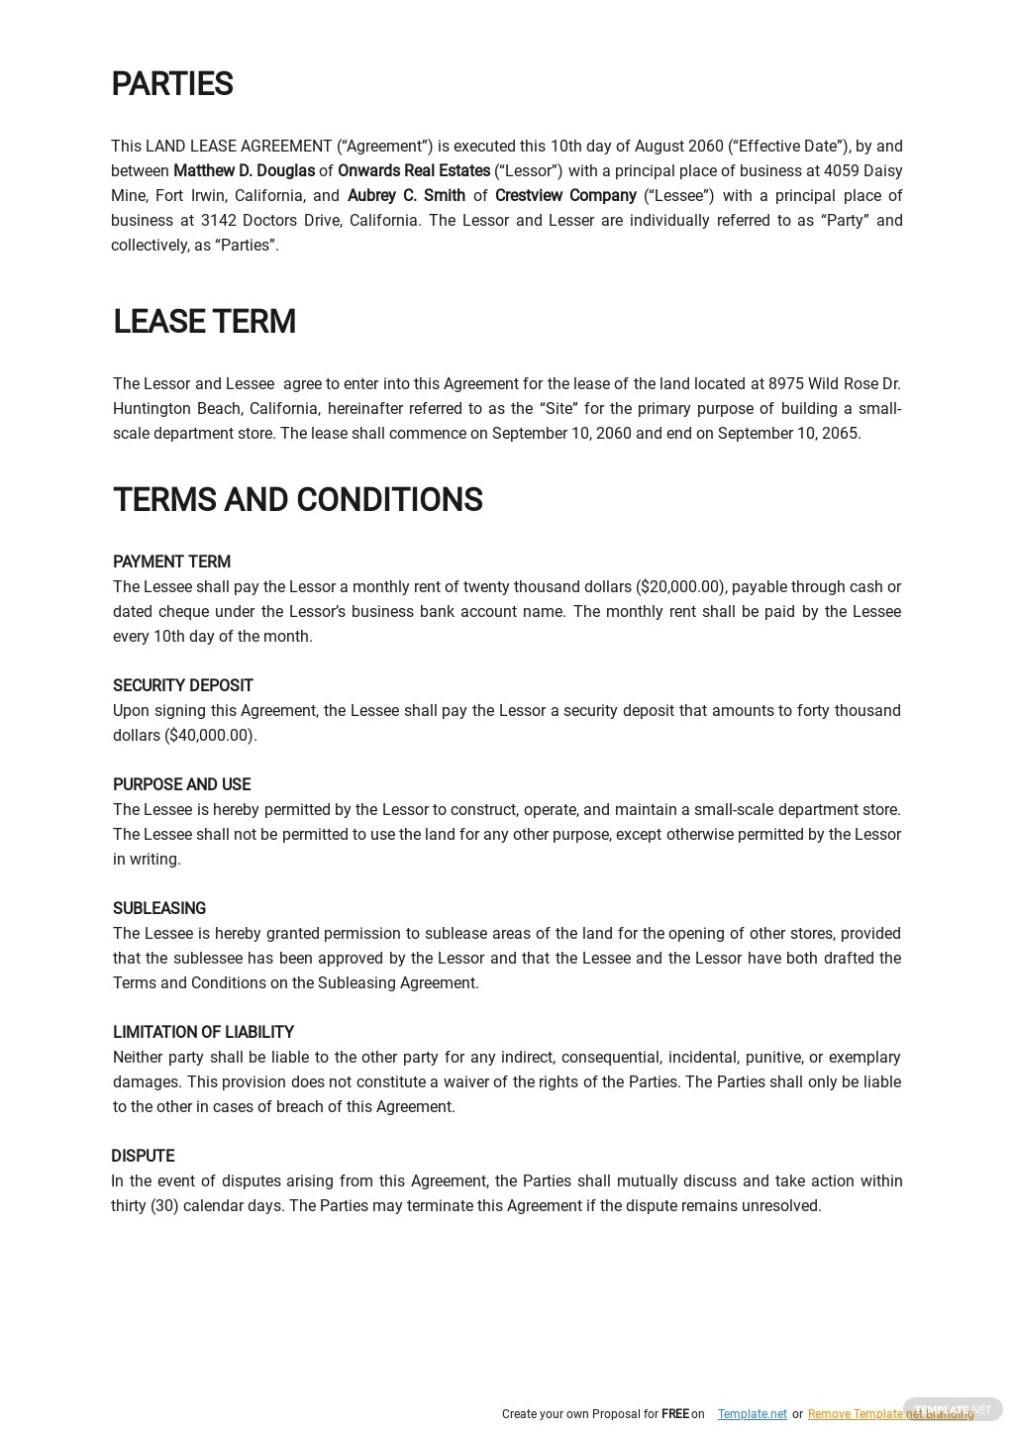 Free Simple Land Lease Agreement Template - Google Docs, Word, Apple With Share Farming Agreement Template